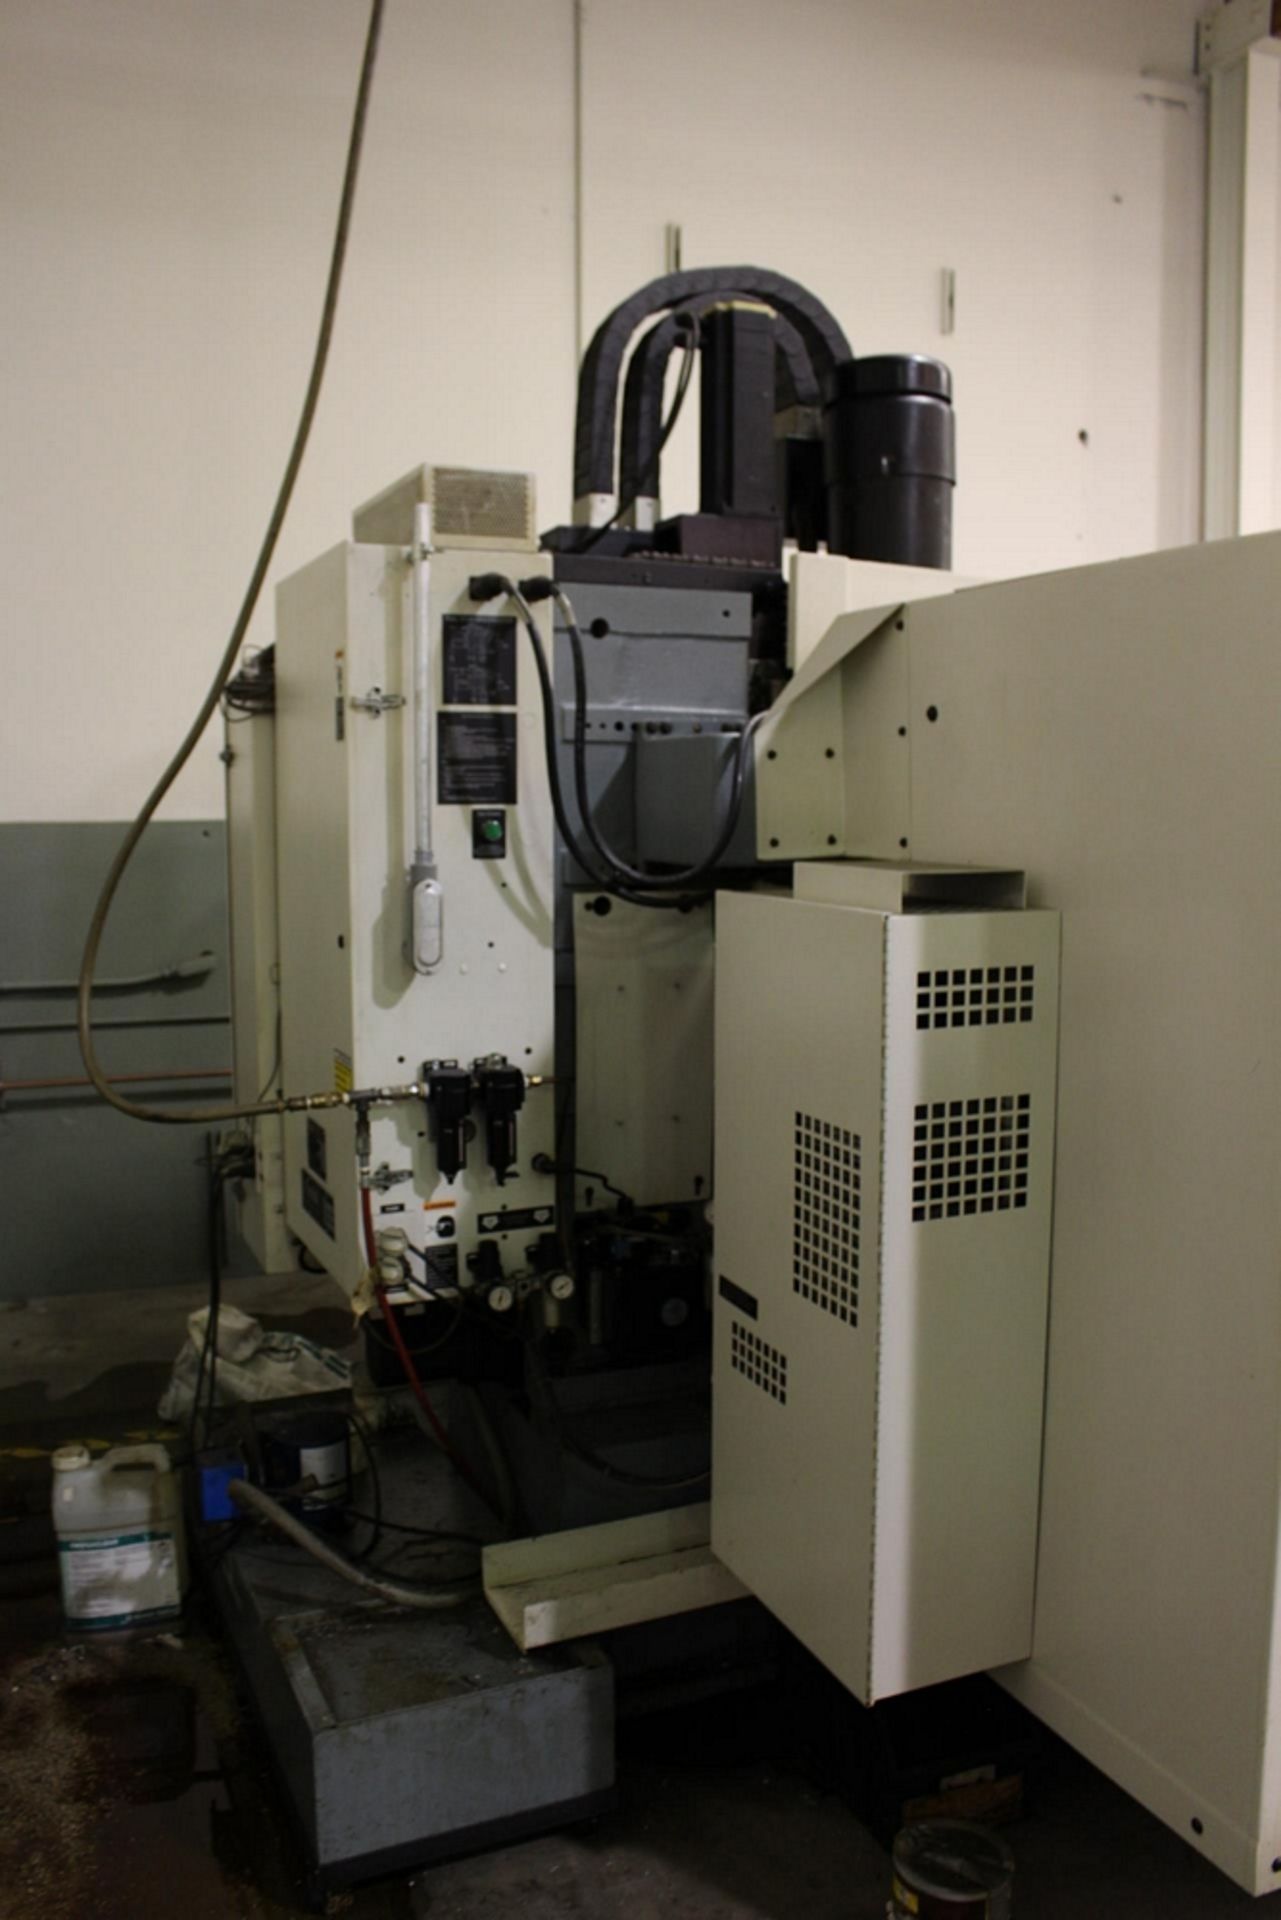 2001 FADAL MODEL 906 VERTICAL MACHINING CENTER, 4020HT, S/N 032001042337, 10,000 RPM SPINDLE, COOL - Image 4 of 7